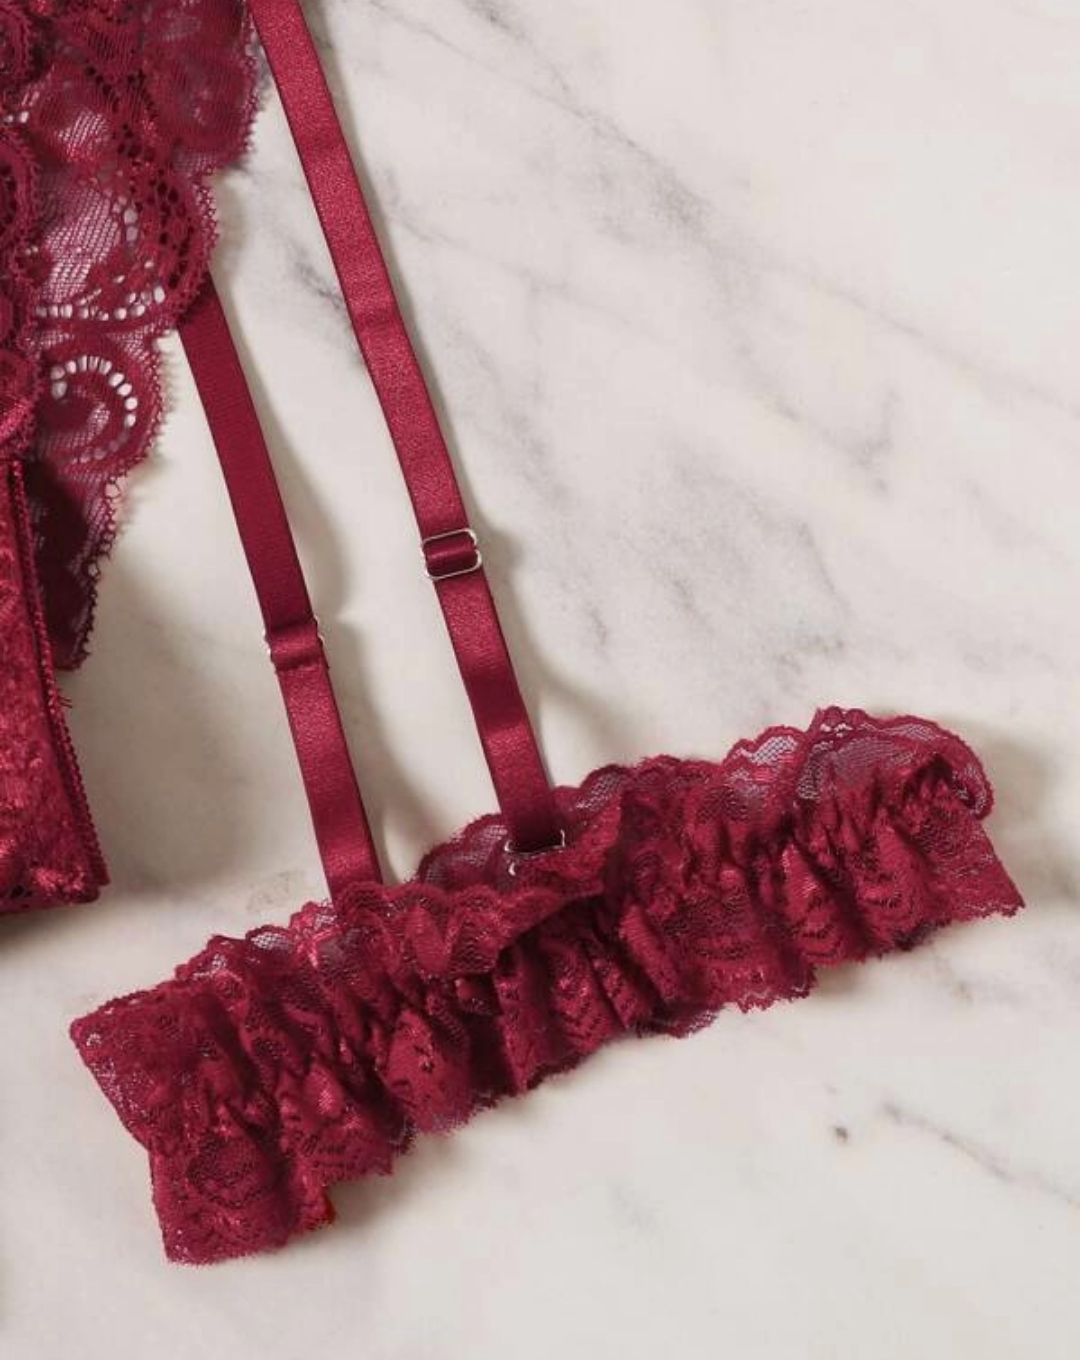 Floral Lace Scalloped French Knickers - Burgundy Red